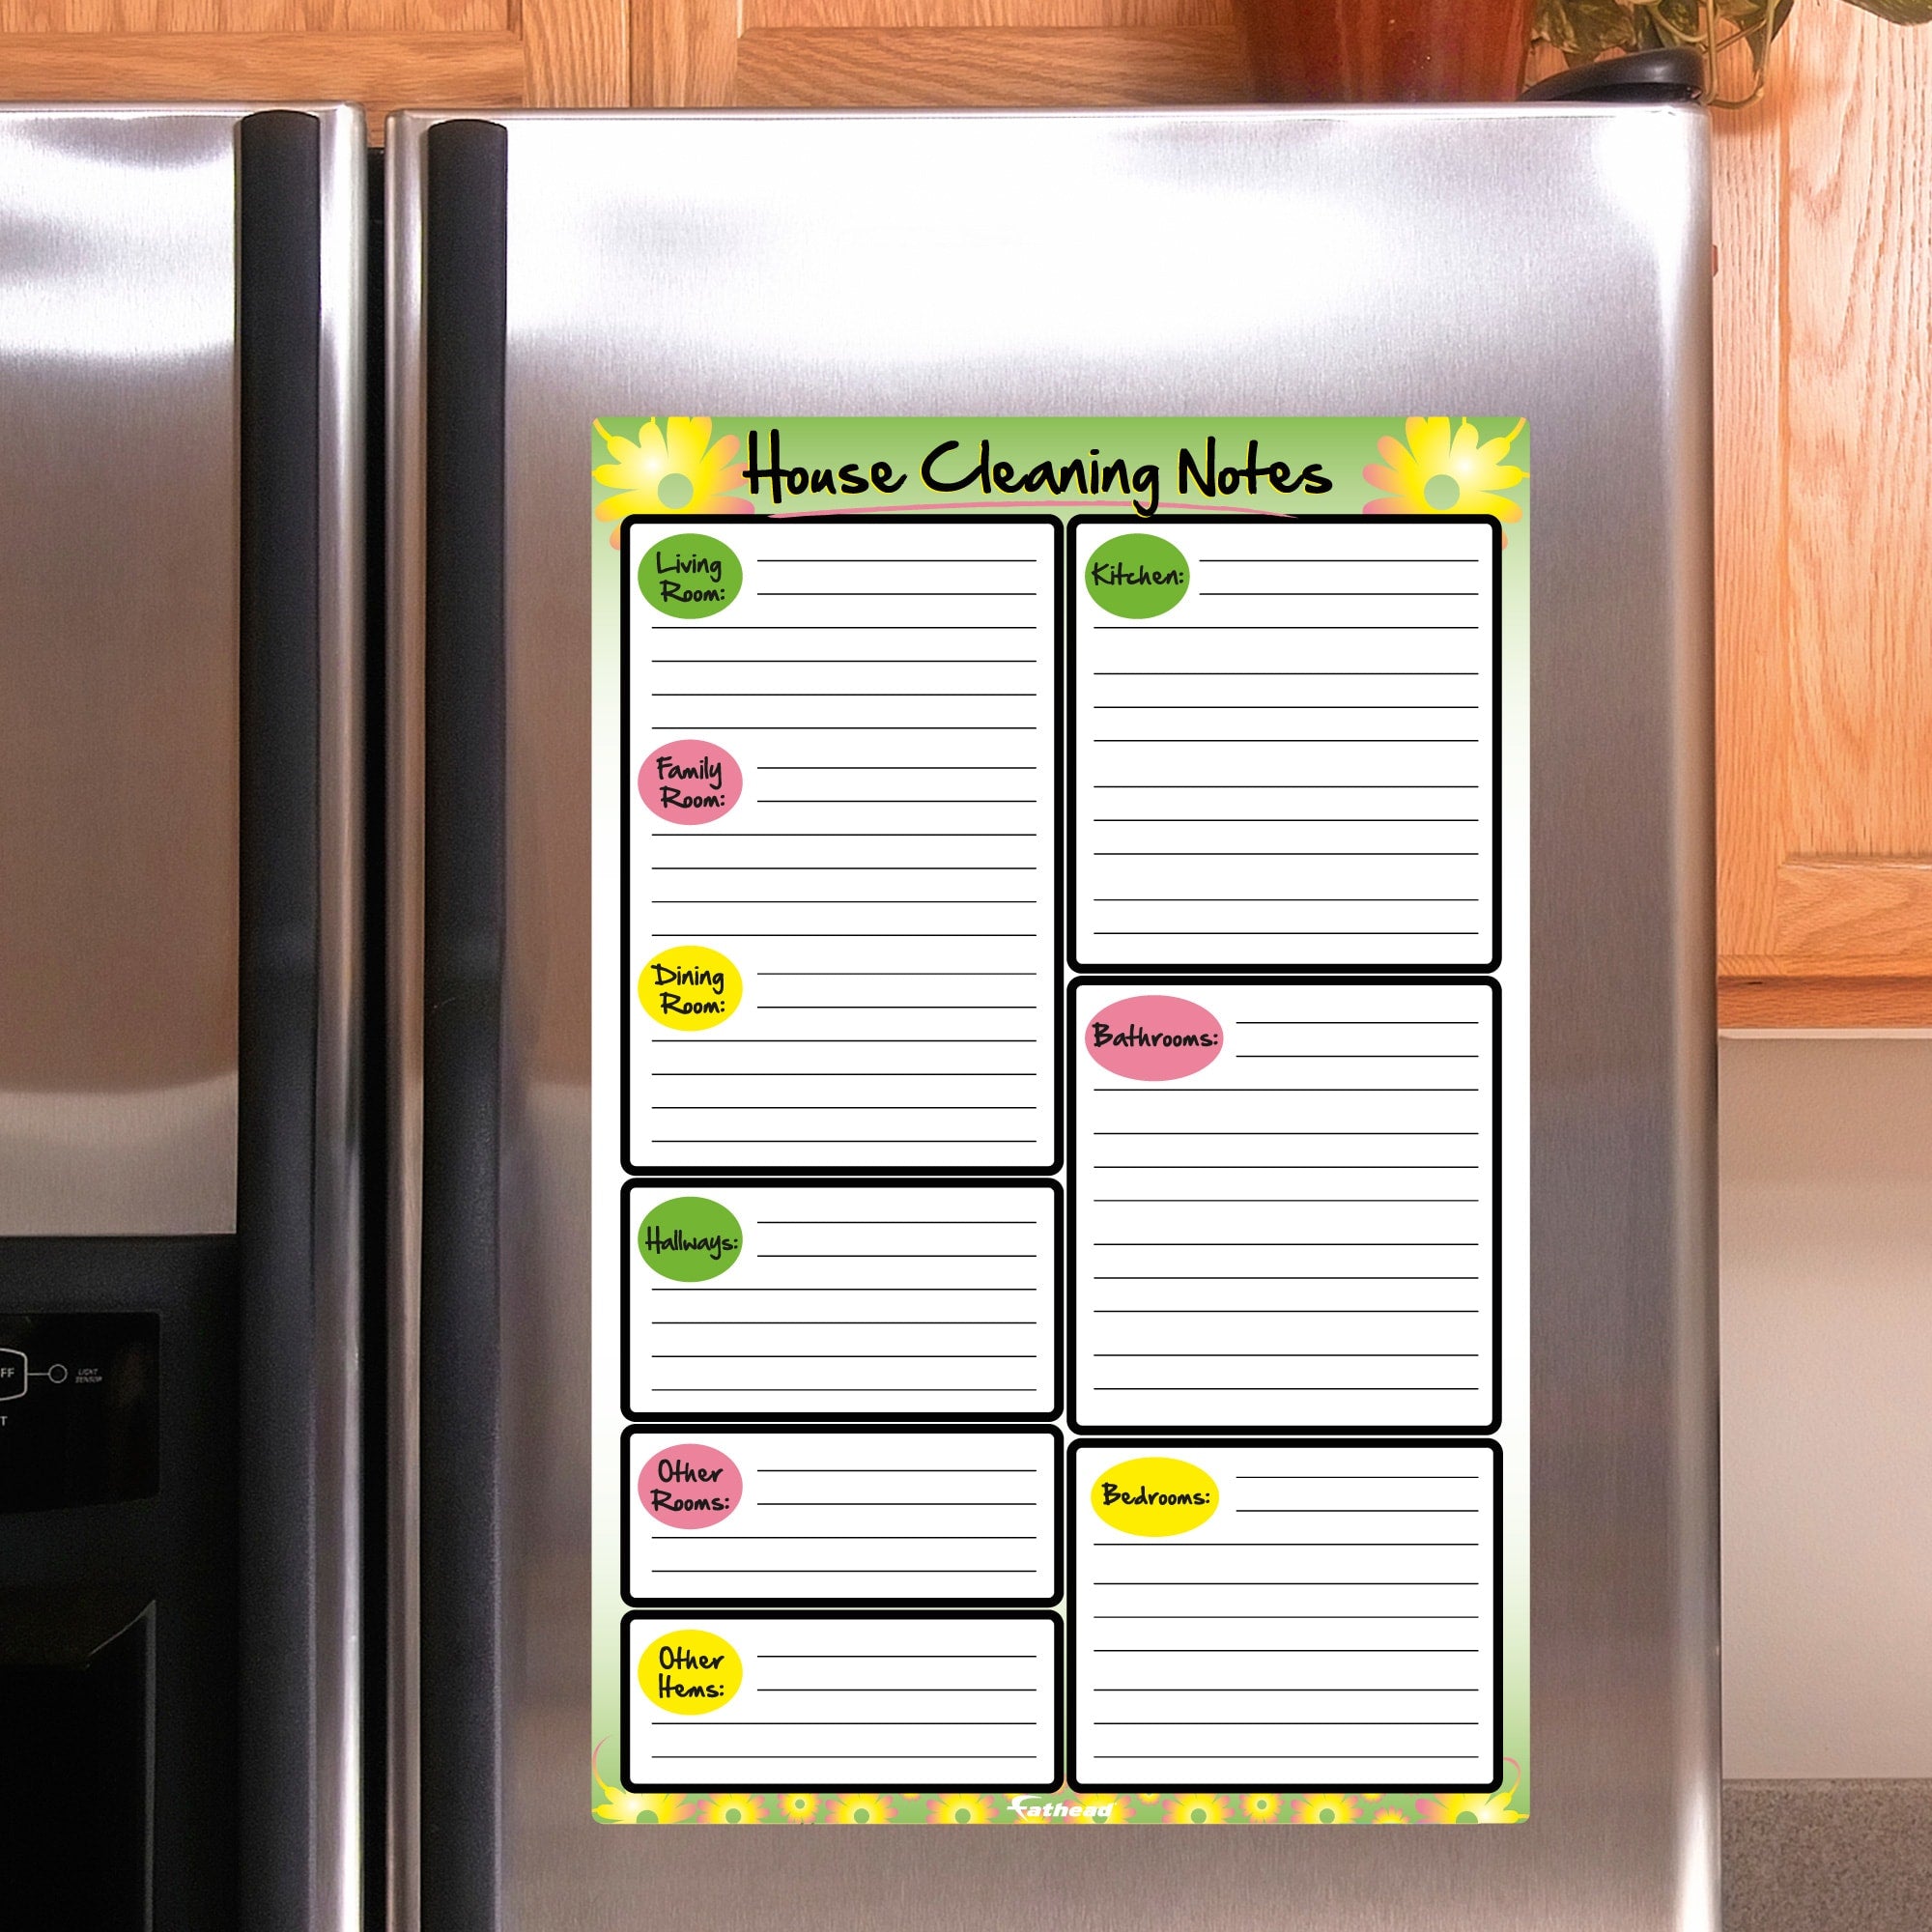 House Cleaning Notes - Removable Dry Erase Vinyl Decal 12"W x 17.0"H by Fathead